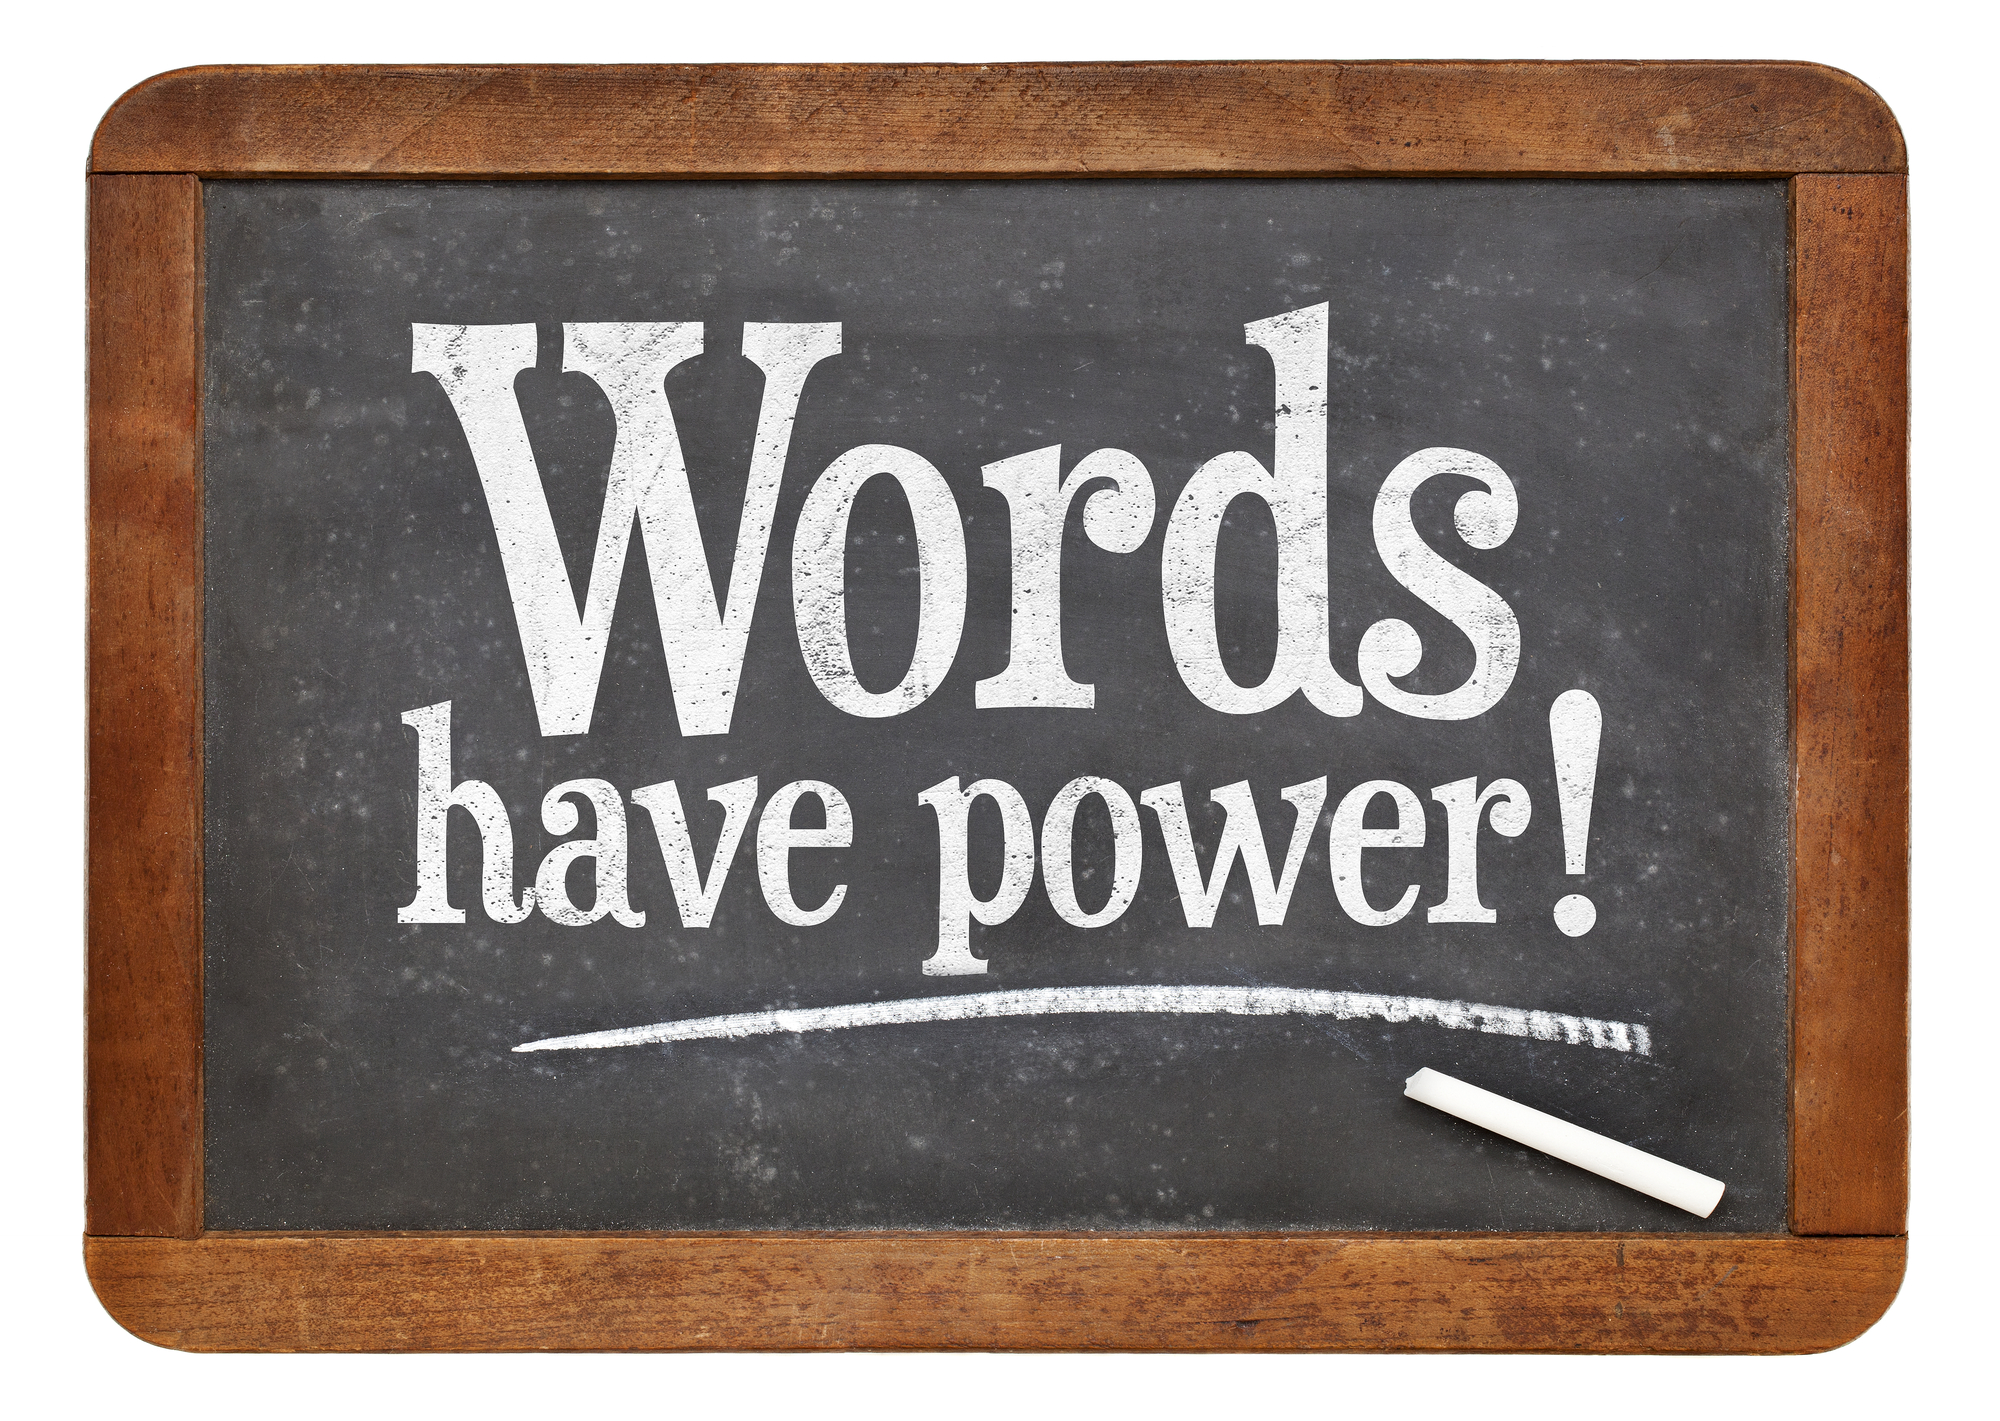 essay on the power of words